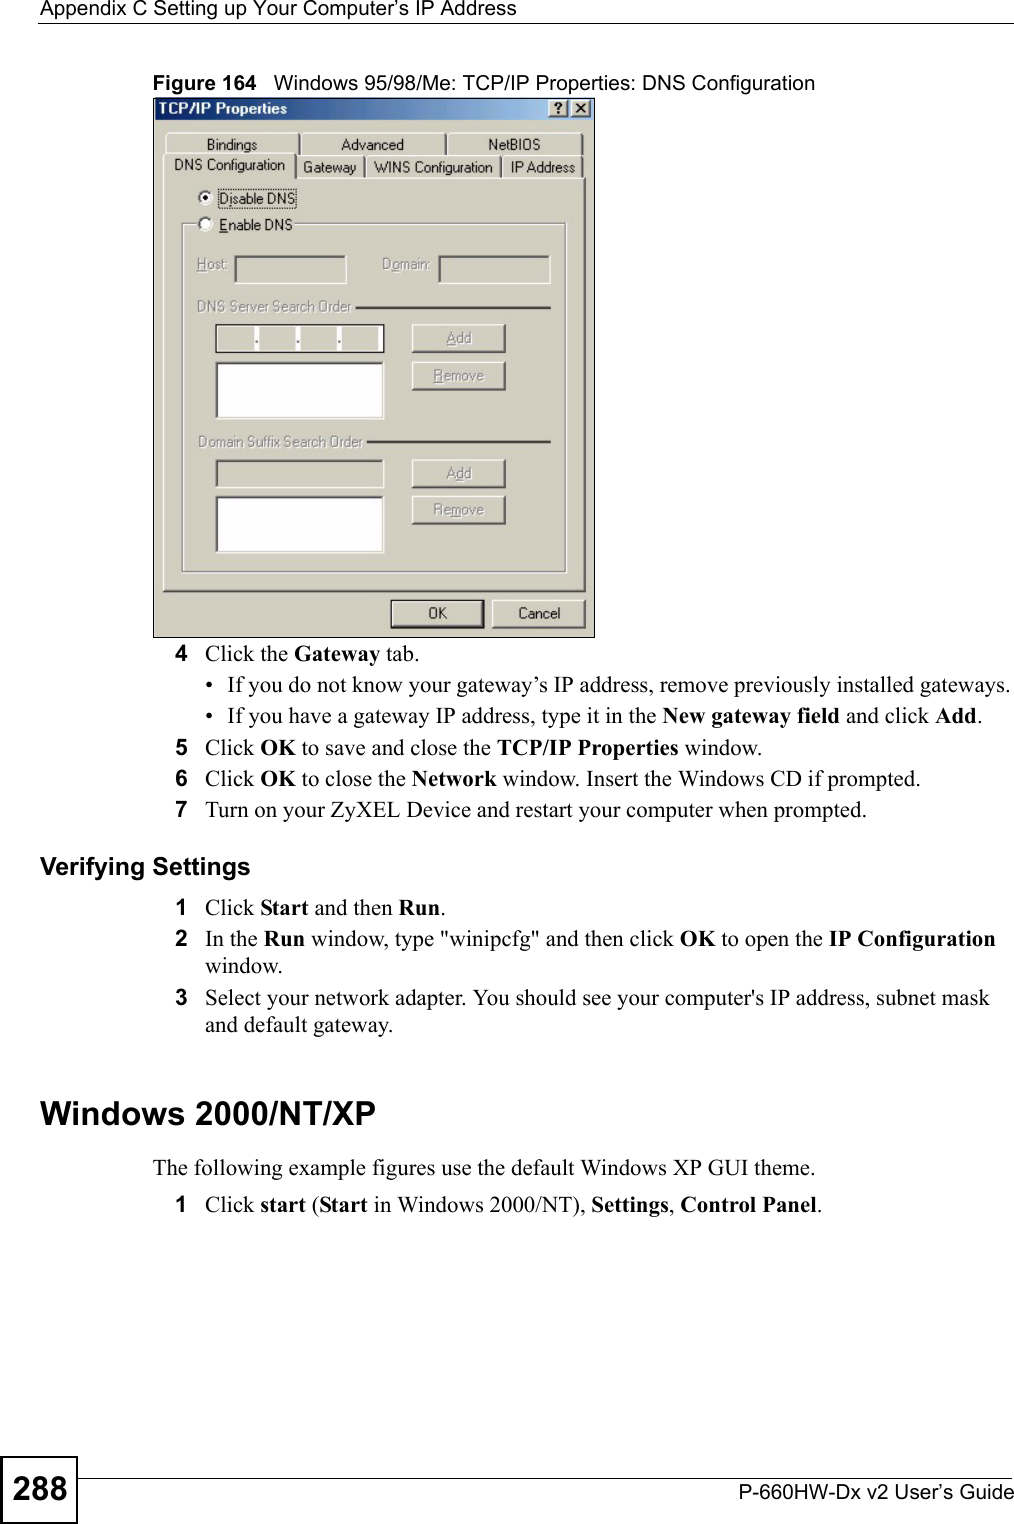 Appendix C Setting up Your Computer’s IP AddressP-660HW-Dx v2 User’s Guide288Figure 164   Windows 95/98/Me: TCP/IP Properties: DNS Configuration4Click the Gateway tab.• If you do not know your gateway’s IP address, remove previously installed gateways.• If you have a gateway IP address, type it in the New gateway field and click Add.5Click OK to save and close the TCP/IP Properties window.6Click OK to close the Network window. Insert the Windows CD if prompted.7Turn on your ZyXEL Device and restart your computer when prompted.Verifying Settings1Click Start and then Run.2In the Run window, type &quot;winipcfg&quot; and then click OK to open the IP Configuration window.3Select your network adapter. You should see your computer&apos;s IP address, subnet mask and default gateway.Windows 2000/NT/XPThe following example figures use the default Windows XP GUI theme.1Click start (Start in Windows 2000/NT), Settings, Control Panel.